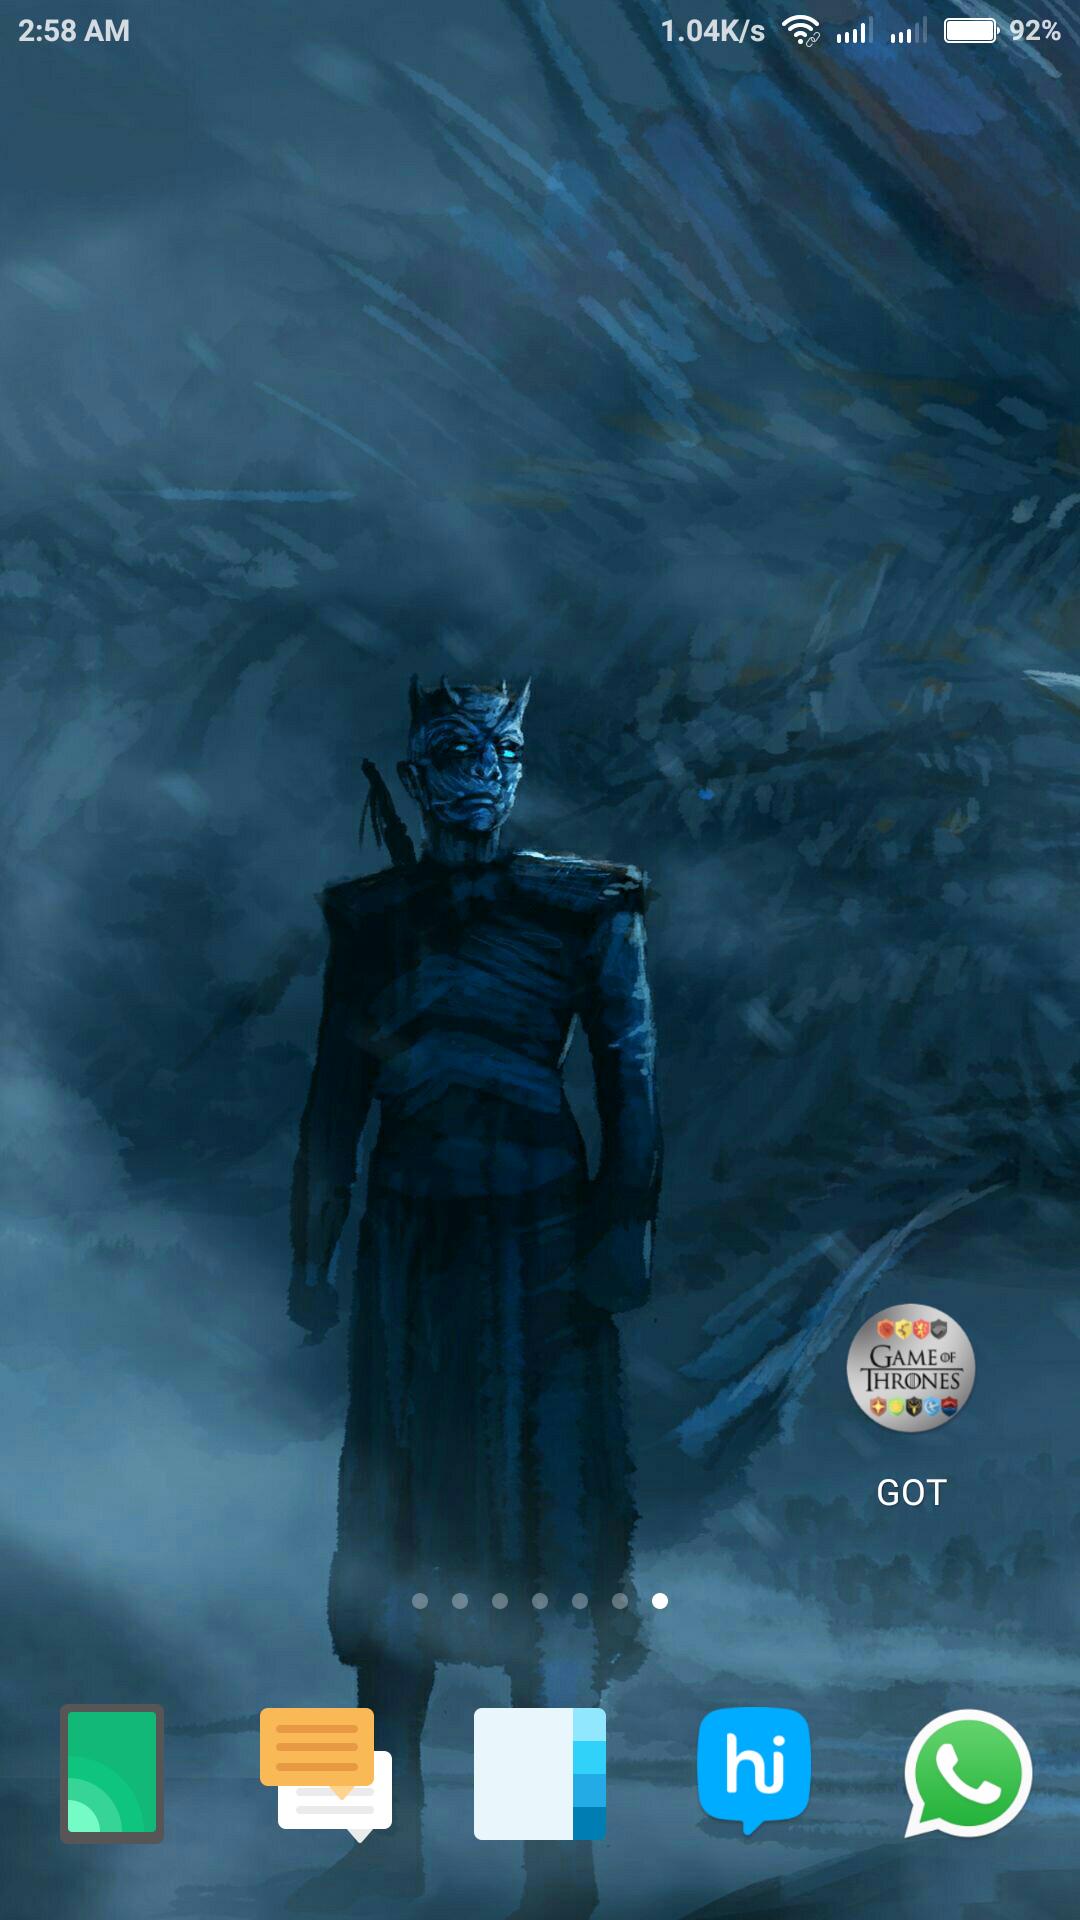 The Game Of Thrones Wallpapers Hd 2019 Got For Android Apk